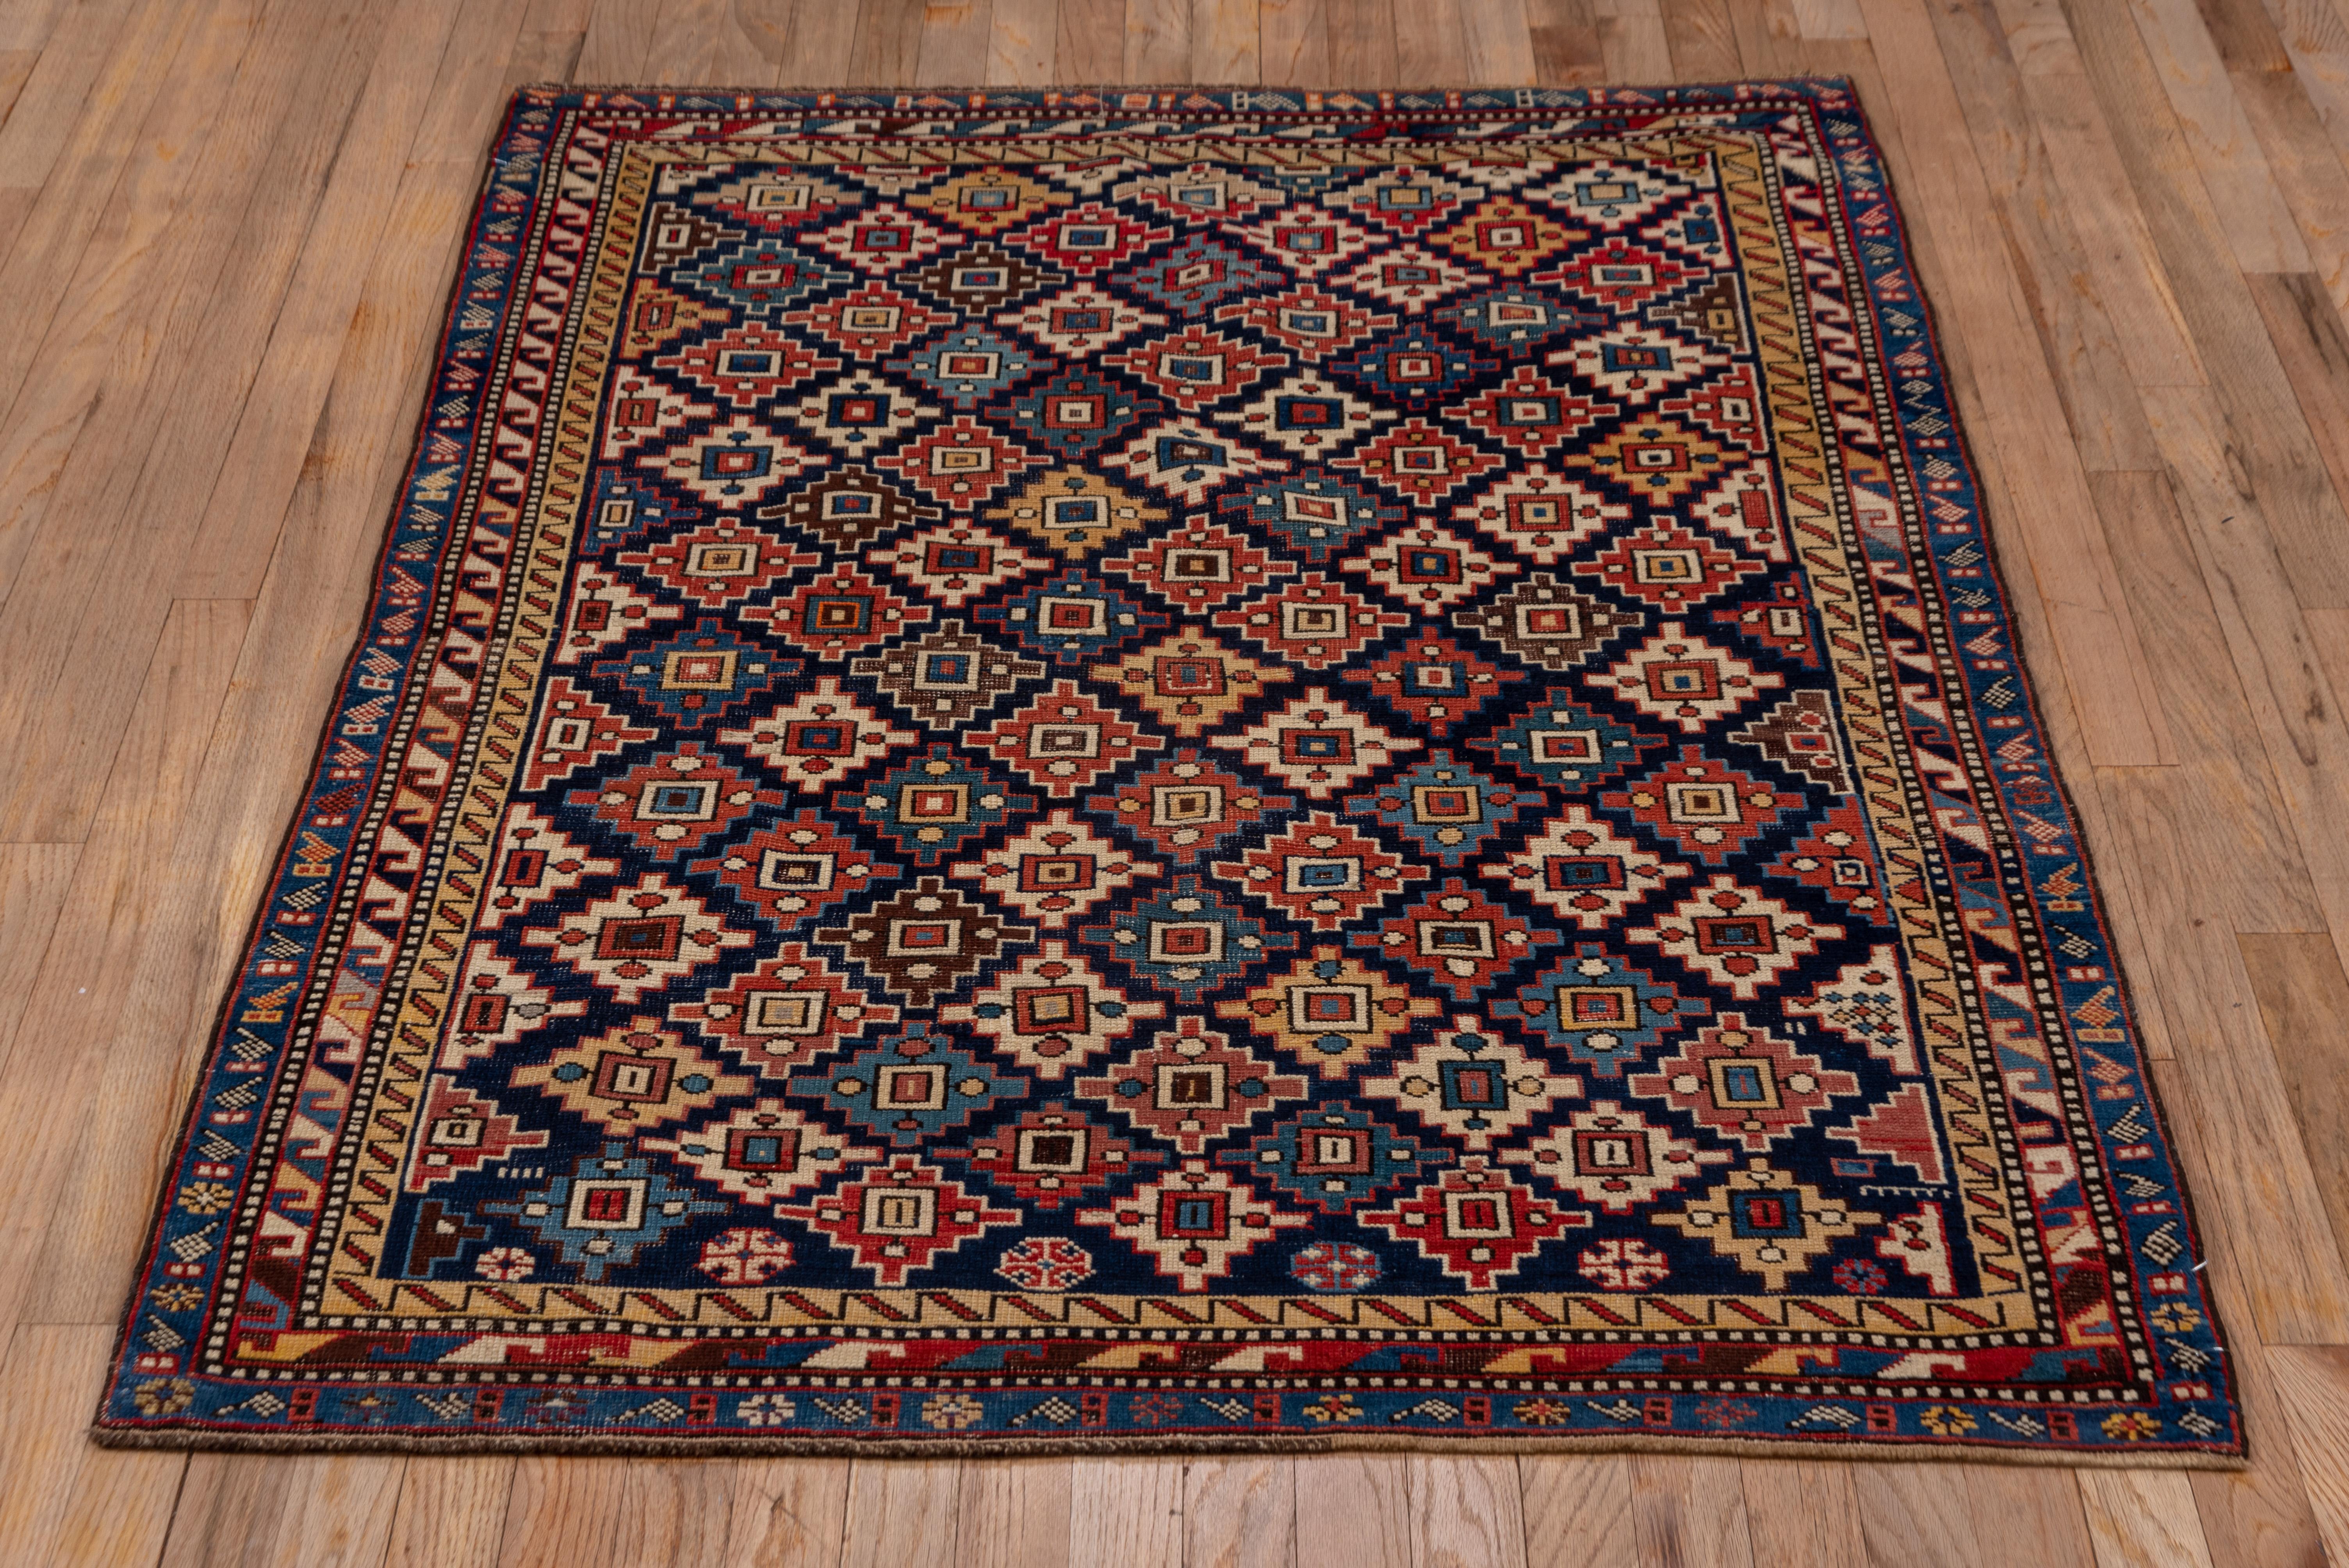 Hand-Knotted Antique Caucasian Shirvan Rug, Geometric Field, Red, Navy & Yellow Palette